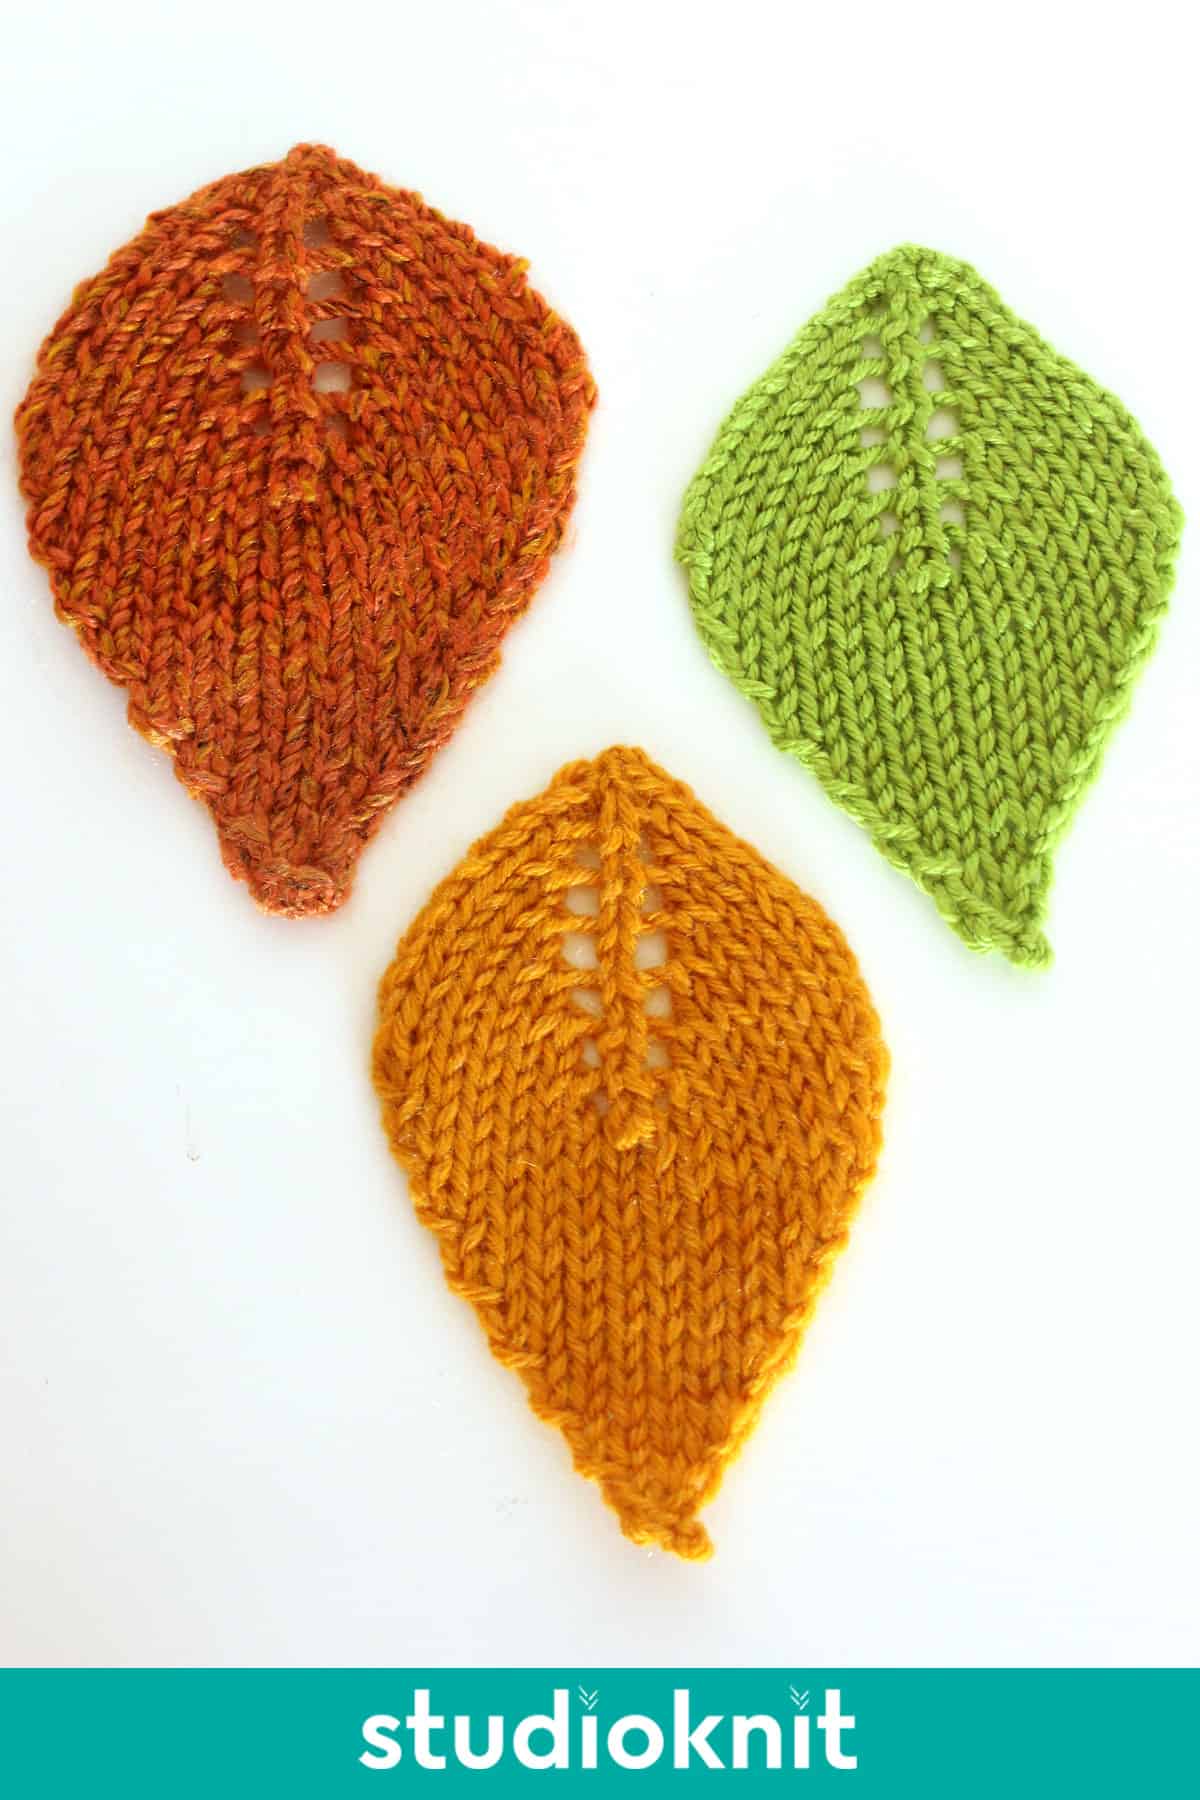 Knitted leaf shapes in stockinette stitch.